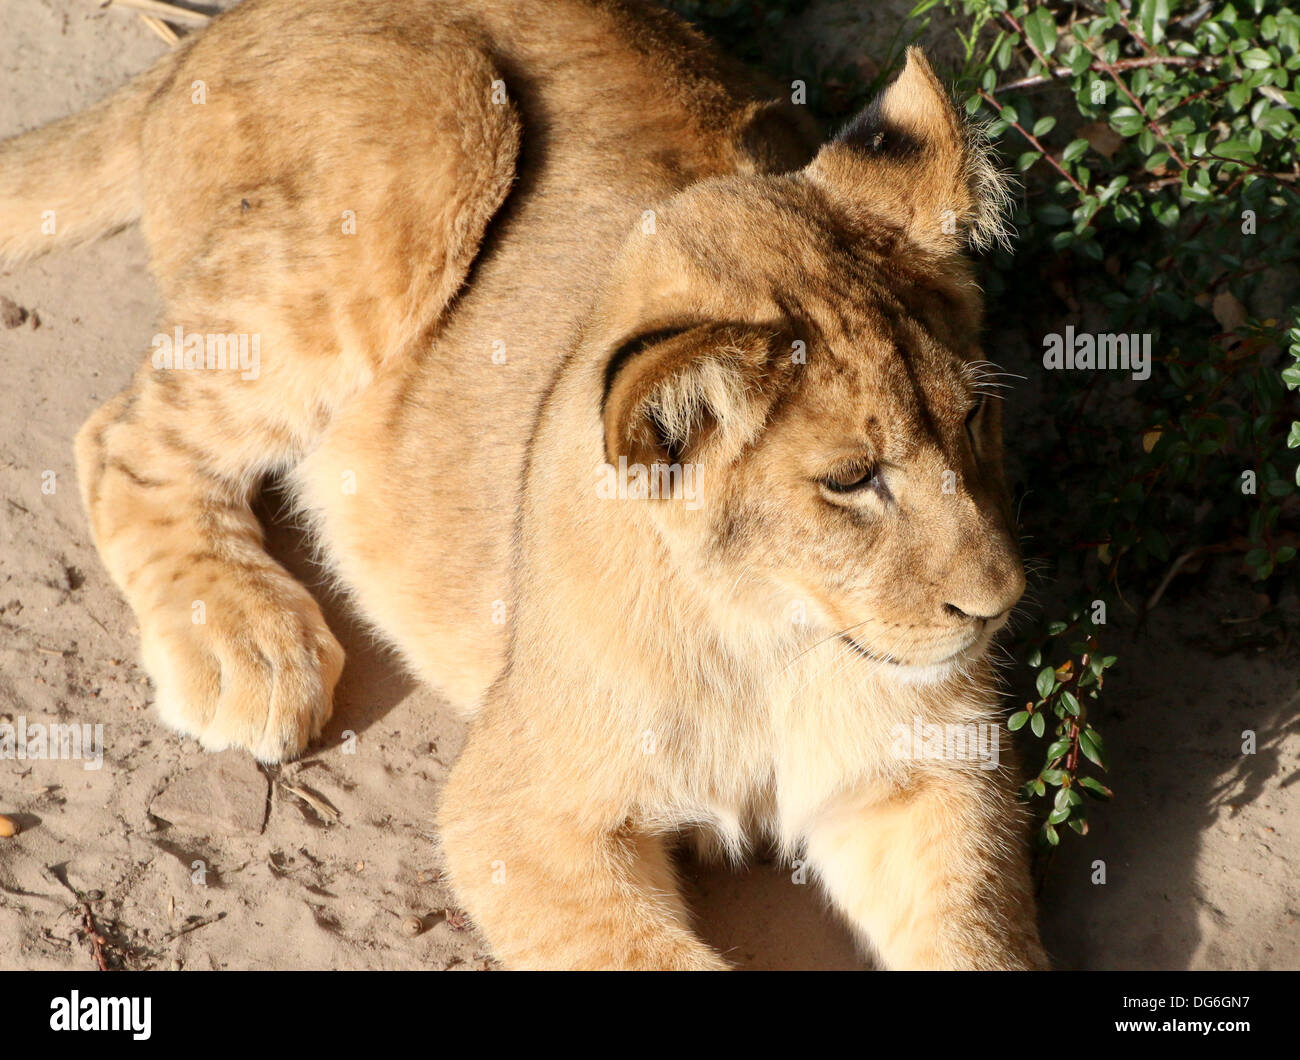 Close-up of the head of a mature lion (Panthera leo) in zoo setting Stock Photo